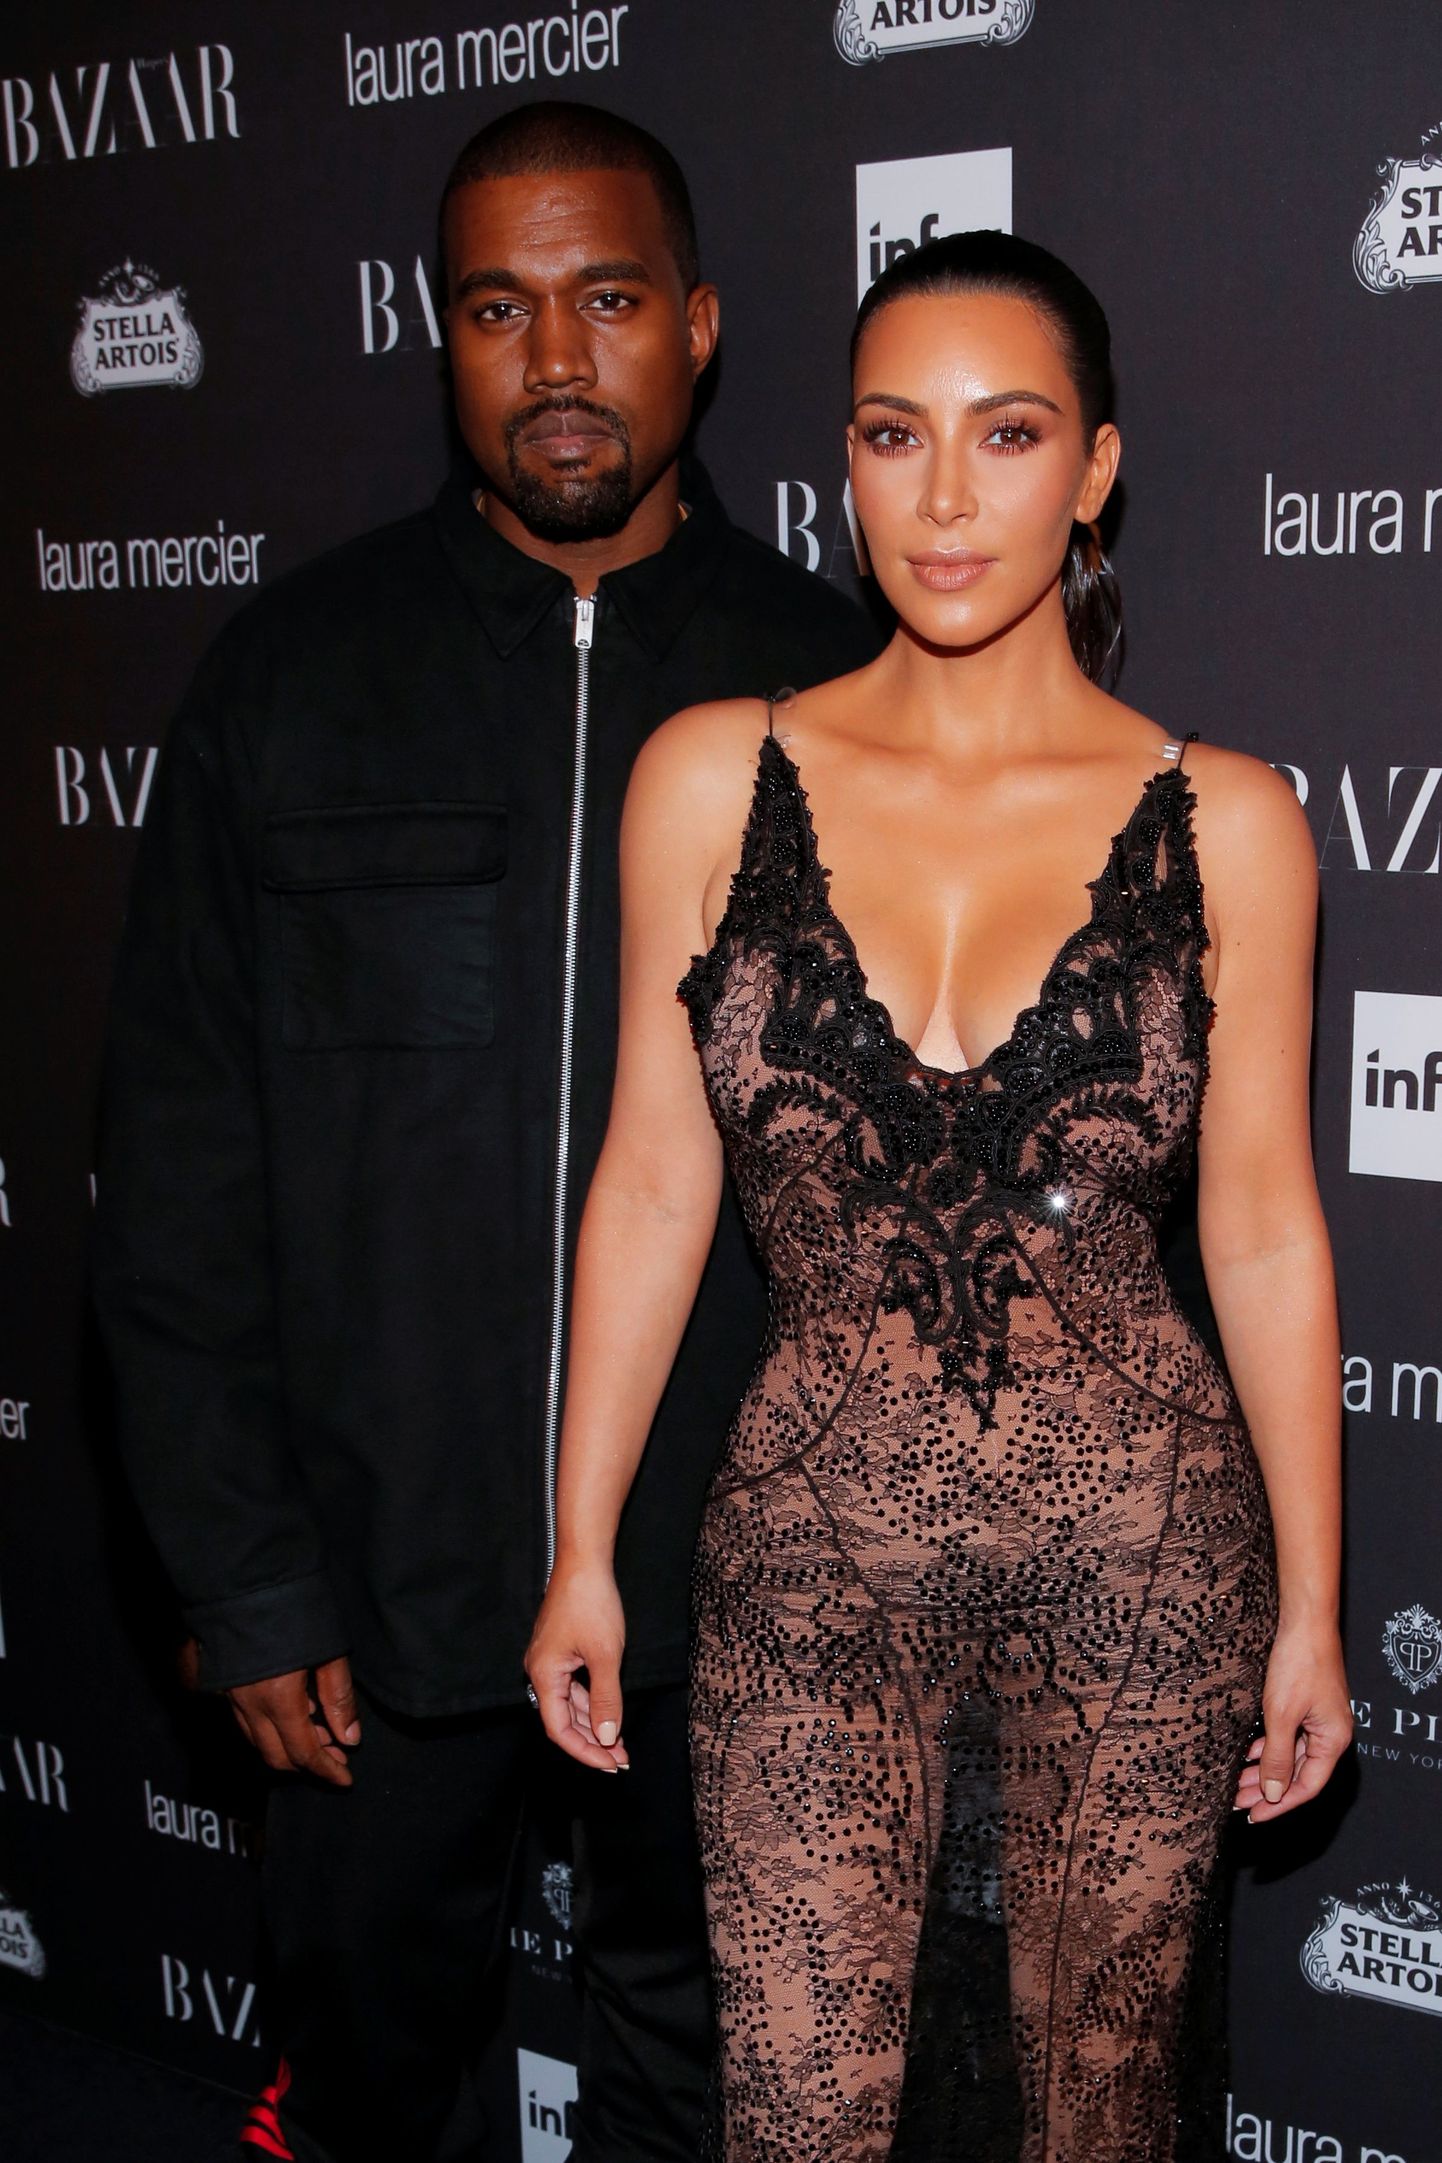 Kanye West and Kim Kardashian attend Harper's Bazaar's celebration of 'ICONS By Carine Roitfeld' at The Plaza Hotel during New York Fashion Week in Manhattan, New York, U.S., September 9, 2016.  REUTERS/Andrew Kelly